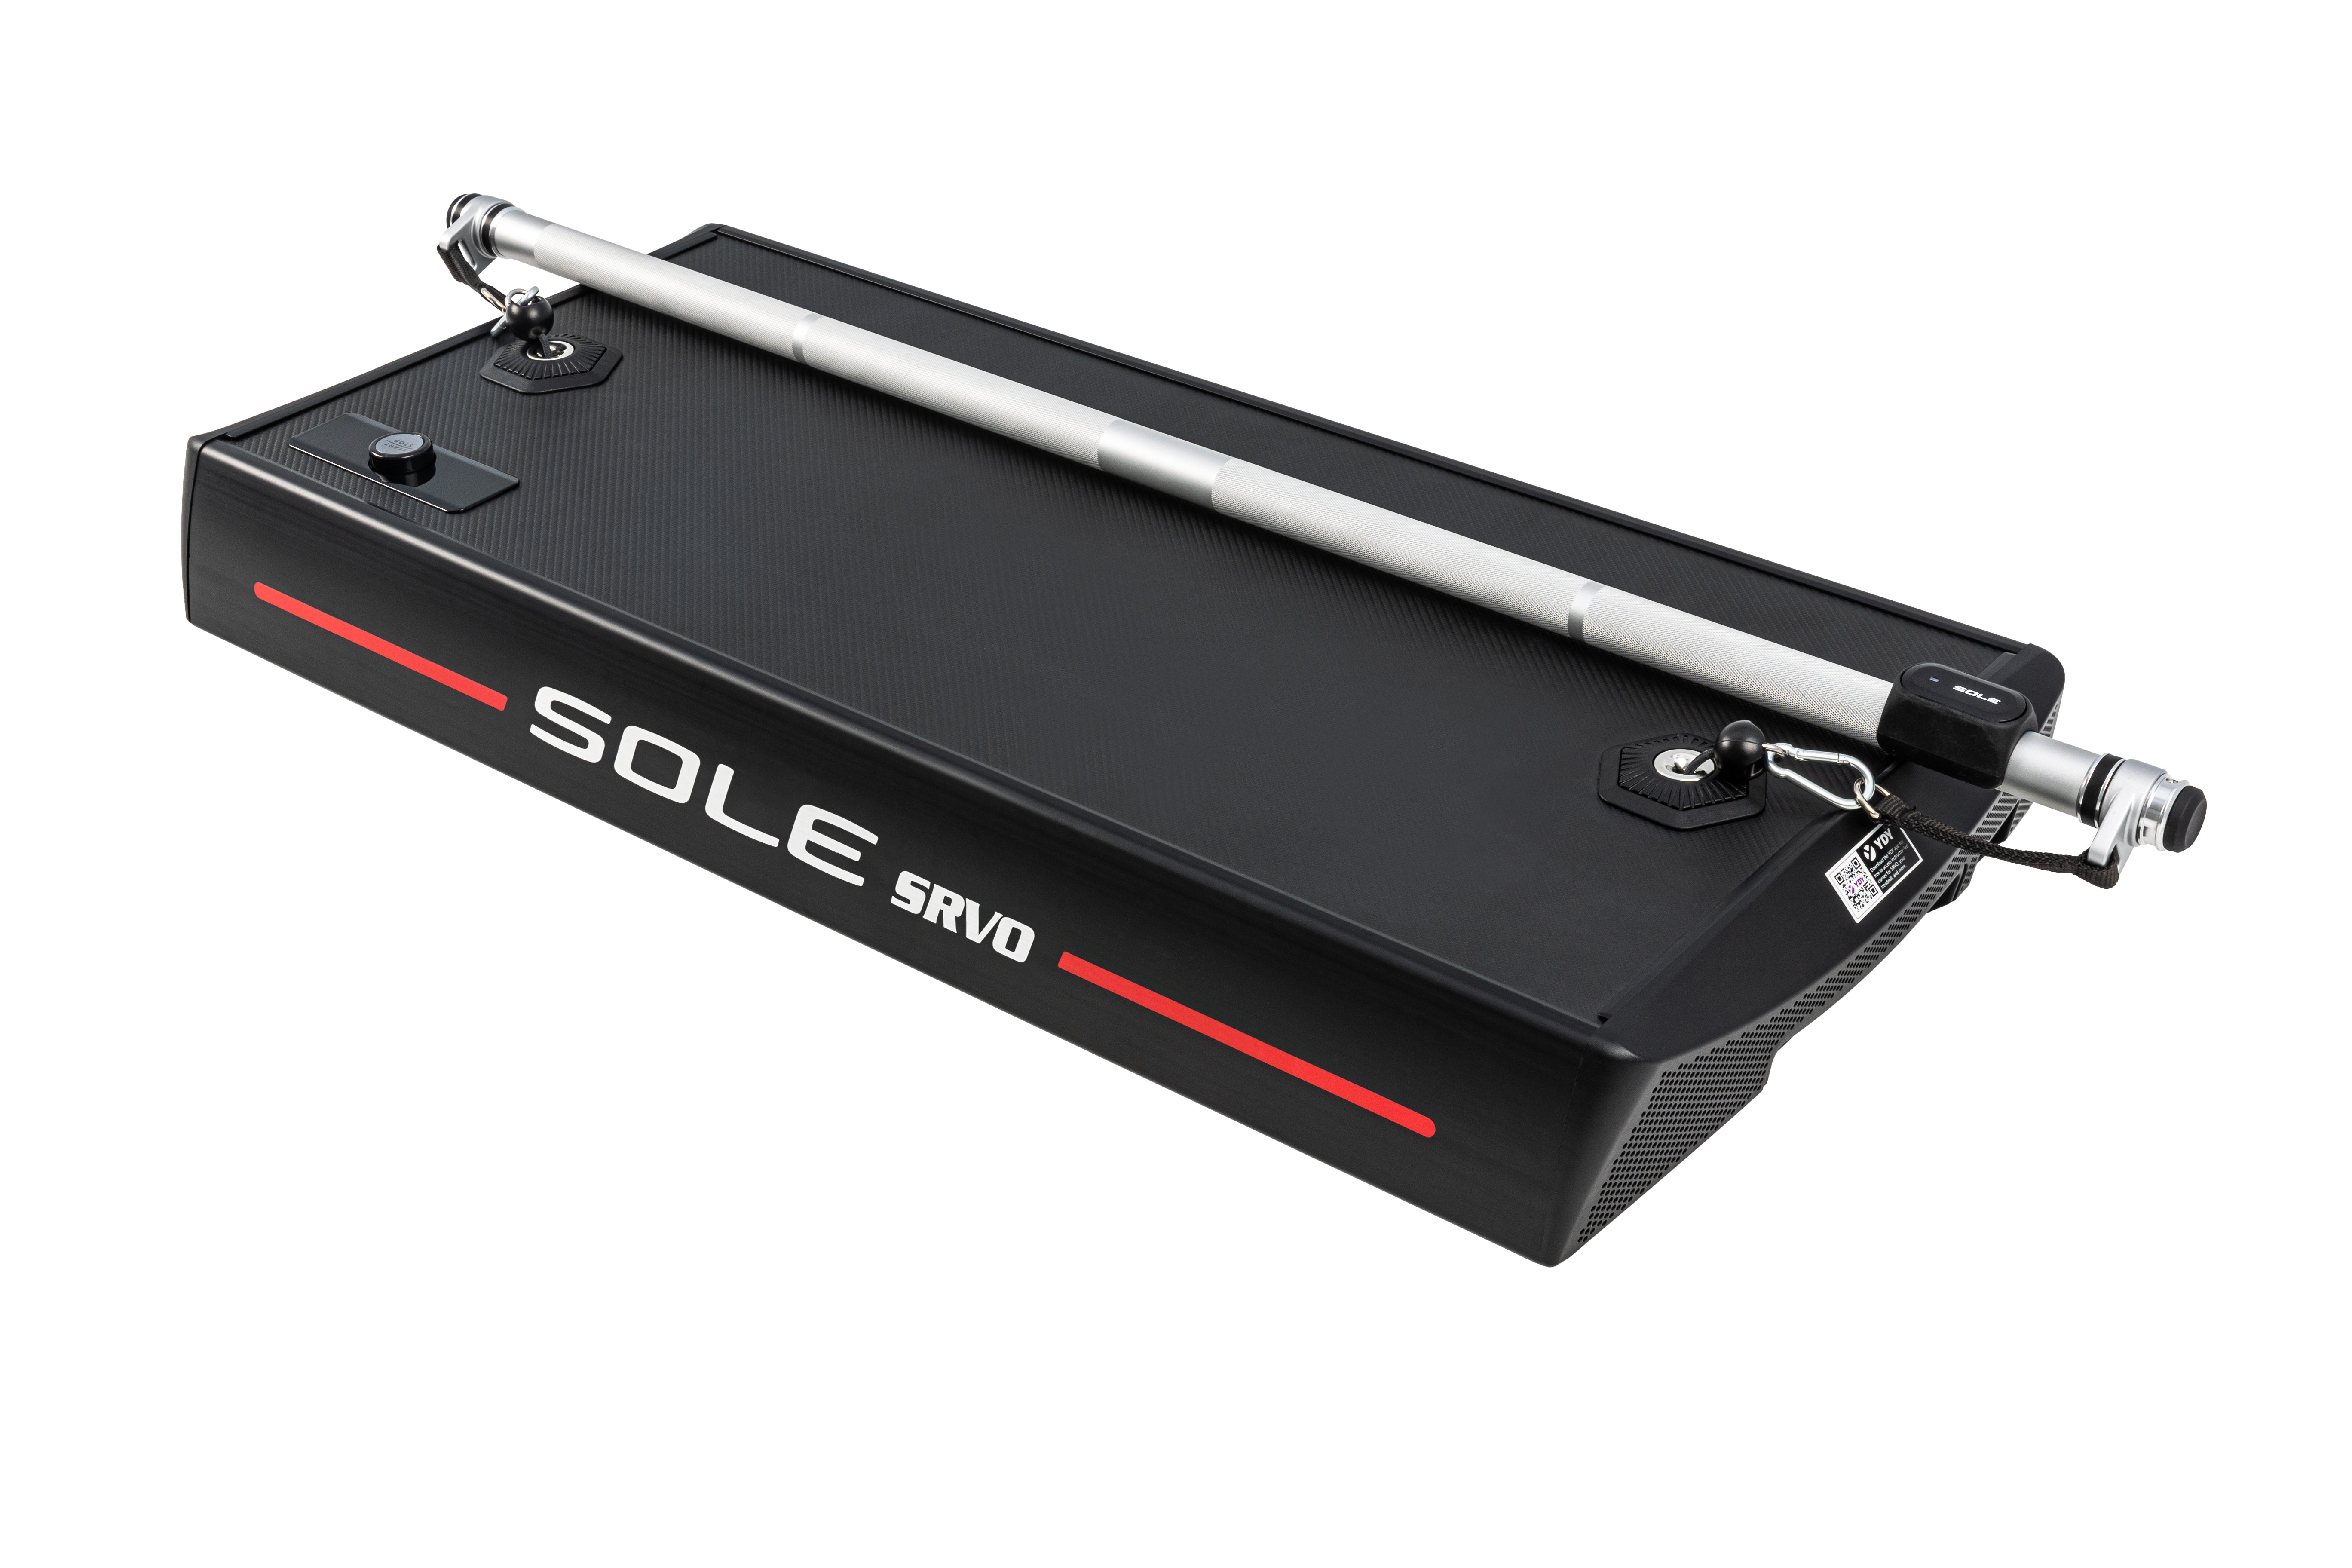 Side view of the Sole SRVO device displaying its black design, "SOLE SRVO" logo with a red stripe, and an extended retractable handle on top along with a metal clasp and key ring on the corner.